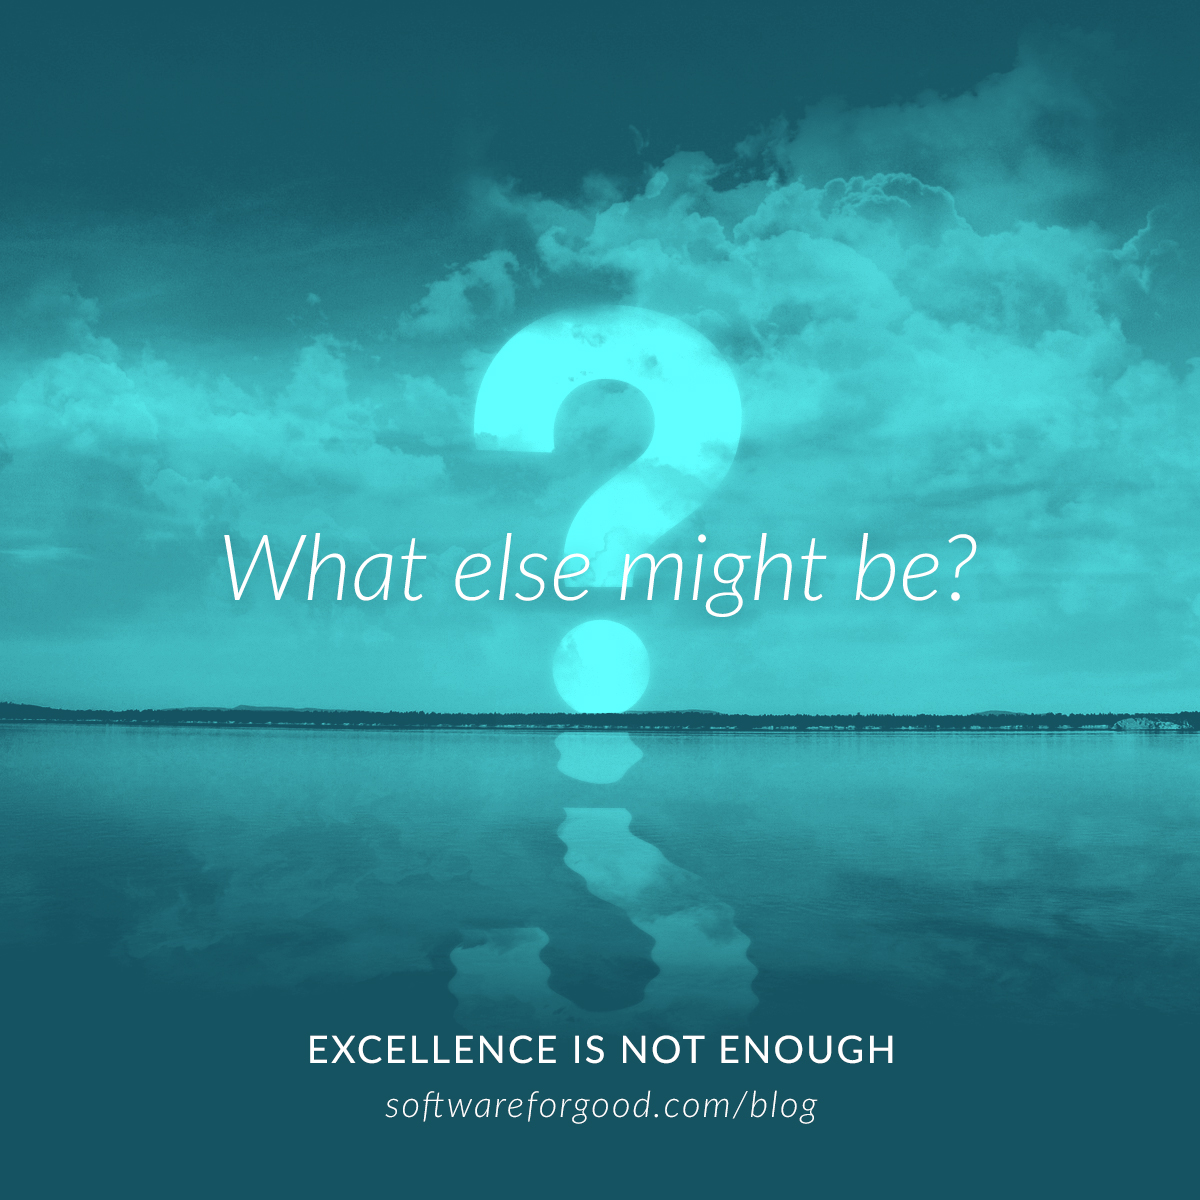 Excellence is Not Enough